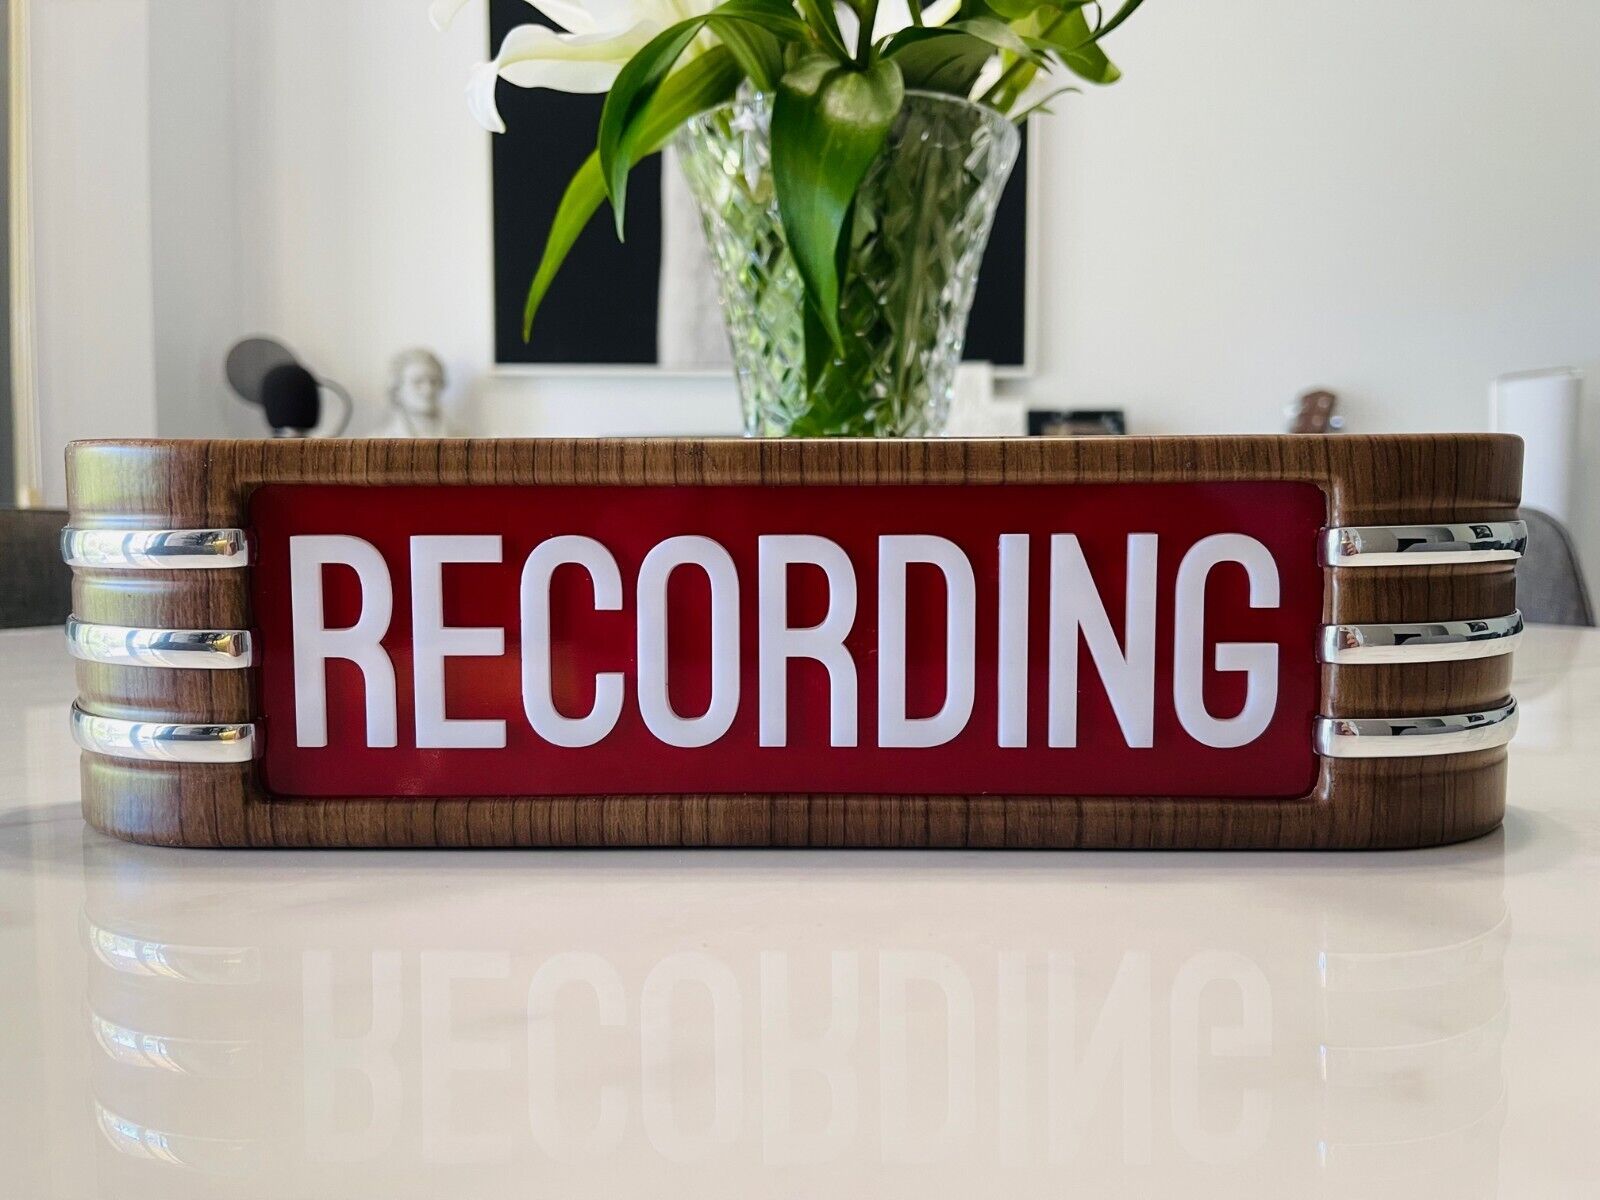 Recording light up sign old vintage RCA style red white lettering NEW PRODUCT